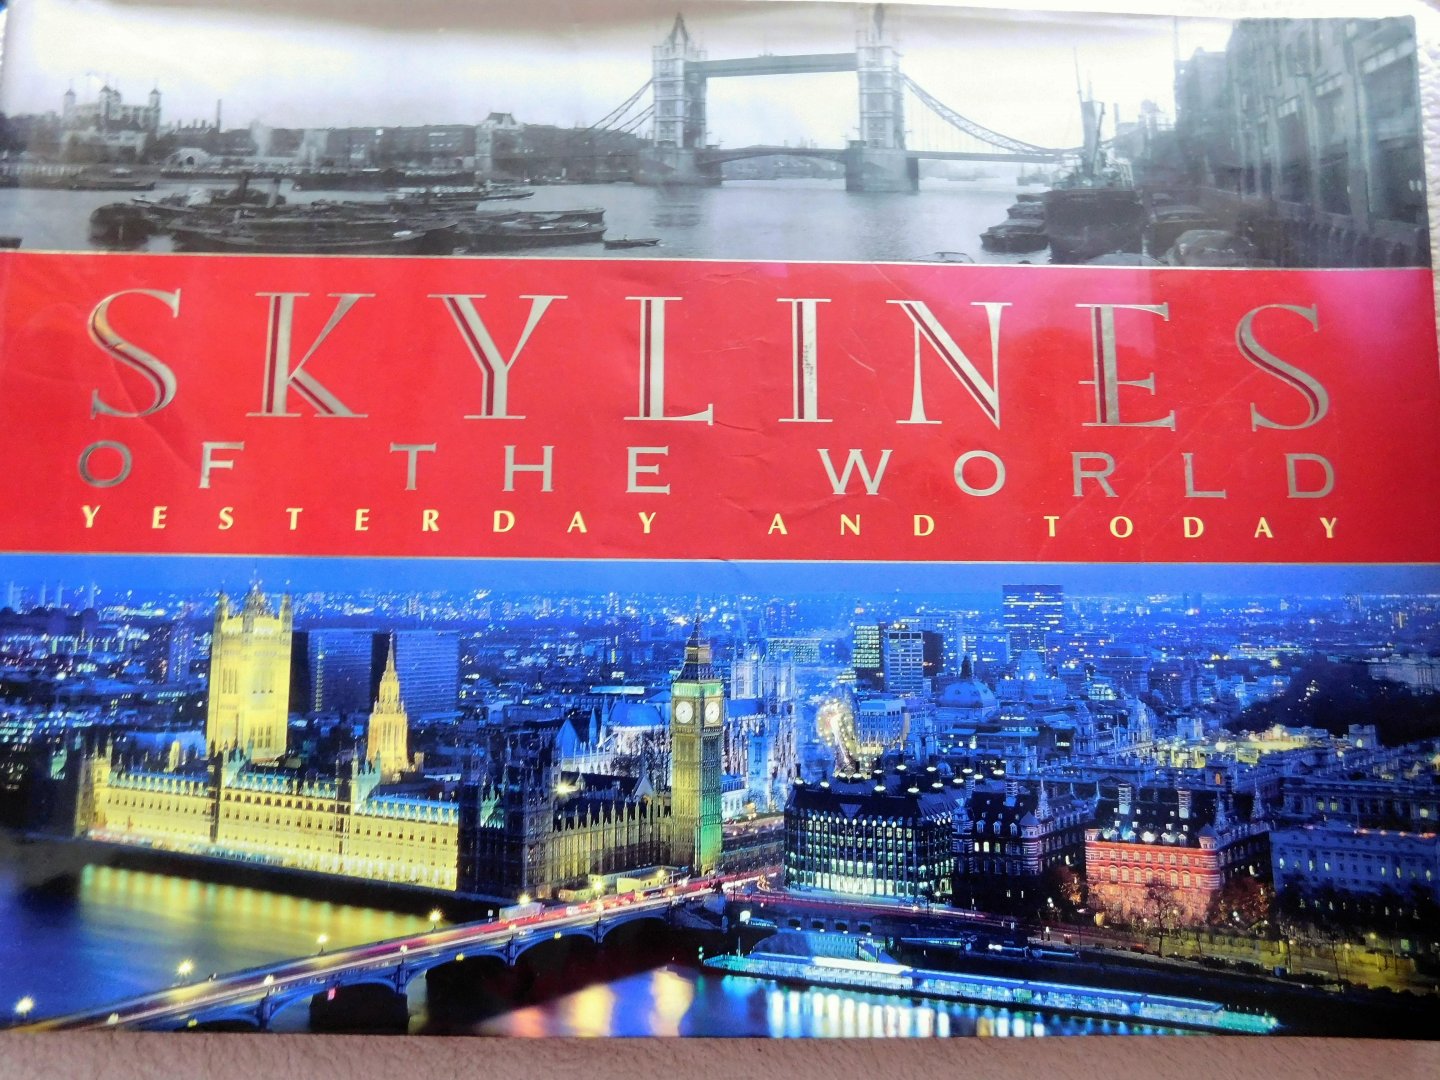 M. Hill Goodspeed - Skylines of the World Yesterday and Today